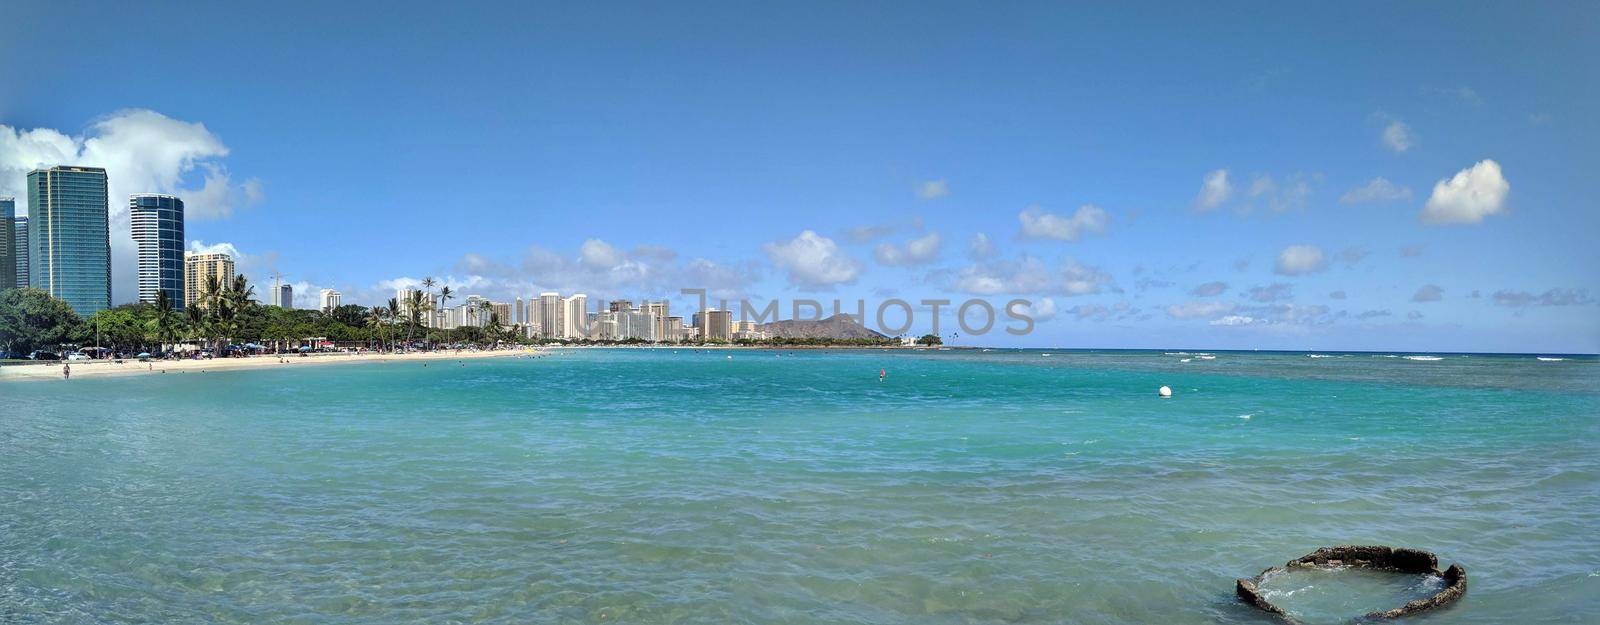 Ala Moana Beach Park with office building and condos in the background by EricGBVD